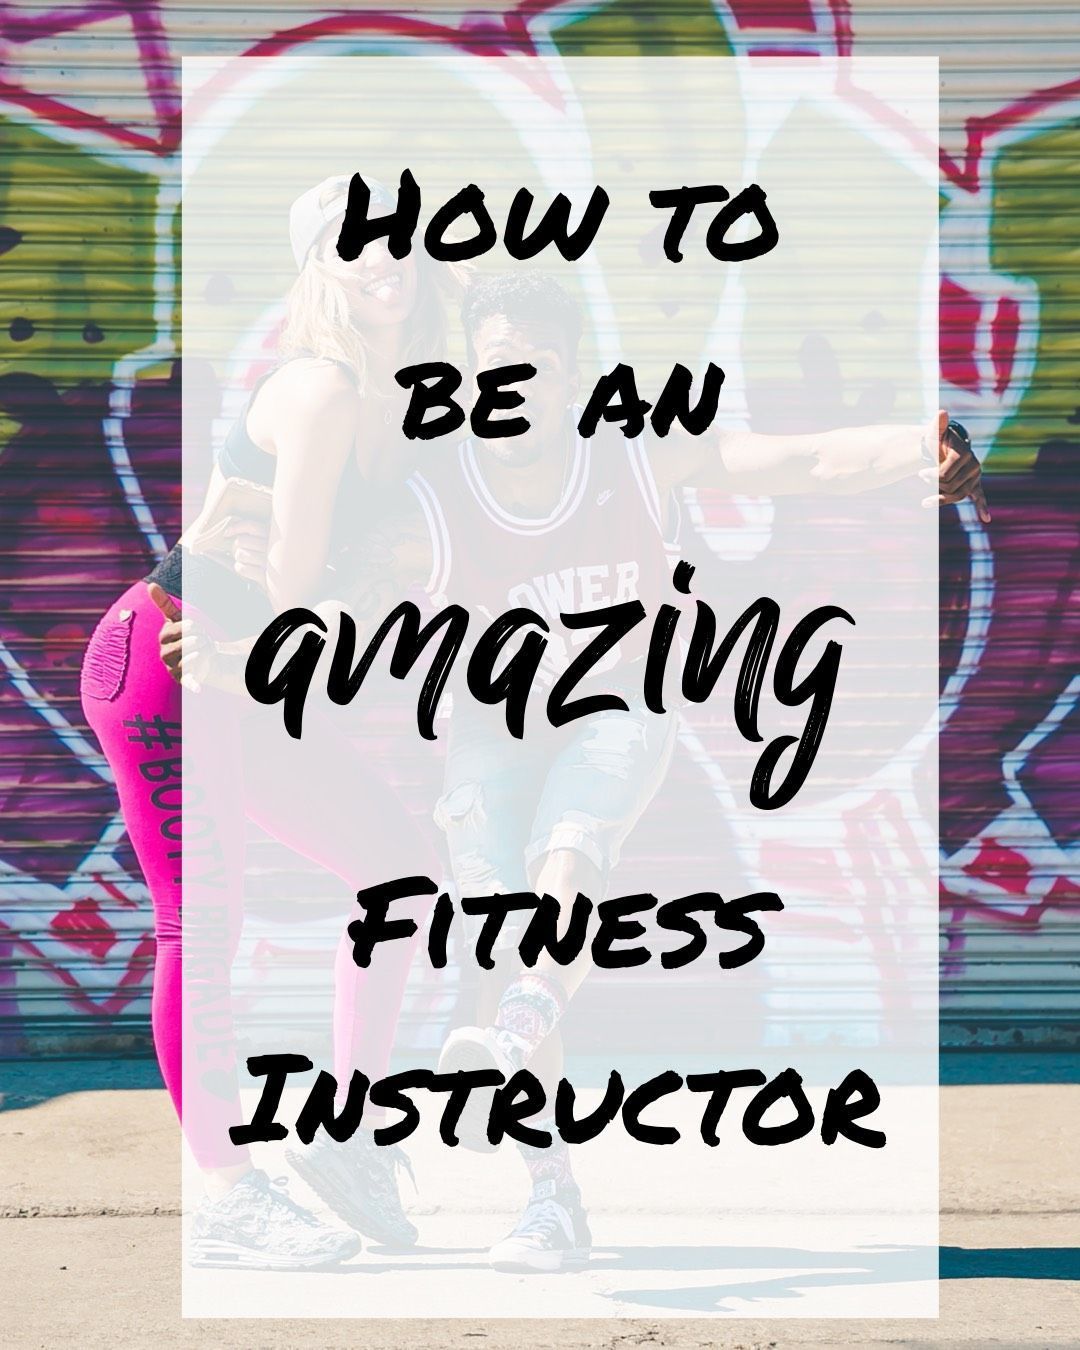 How to Be An Amazing Fitness Instructor -   9 group fitness Memes ideas